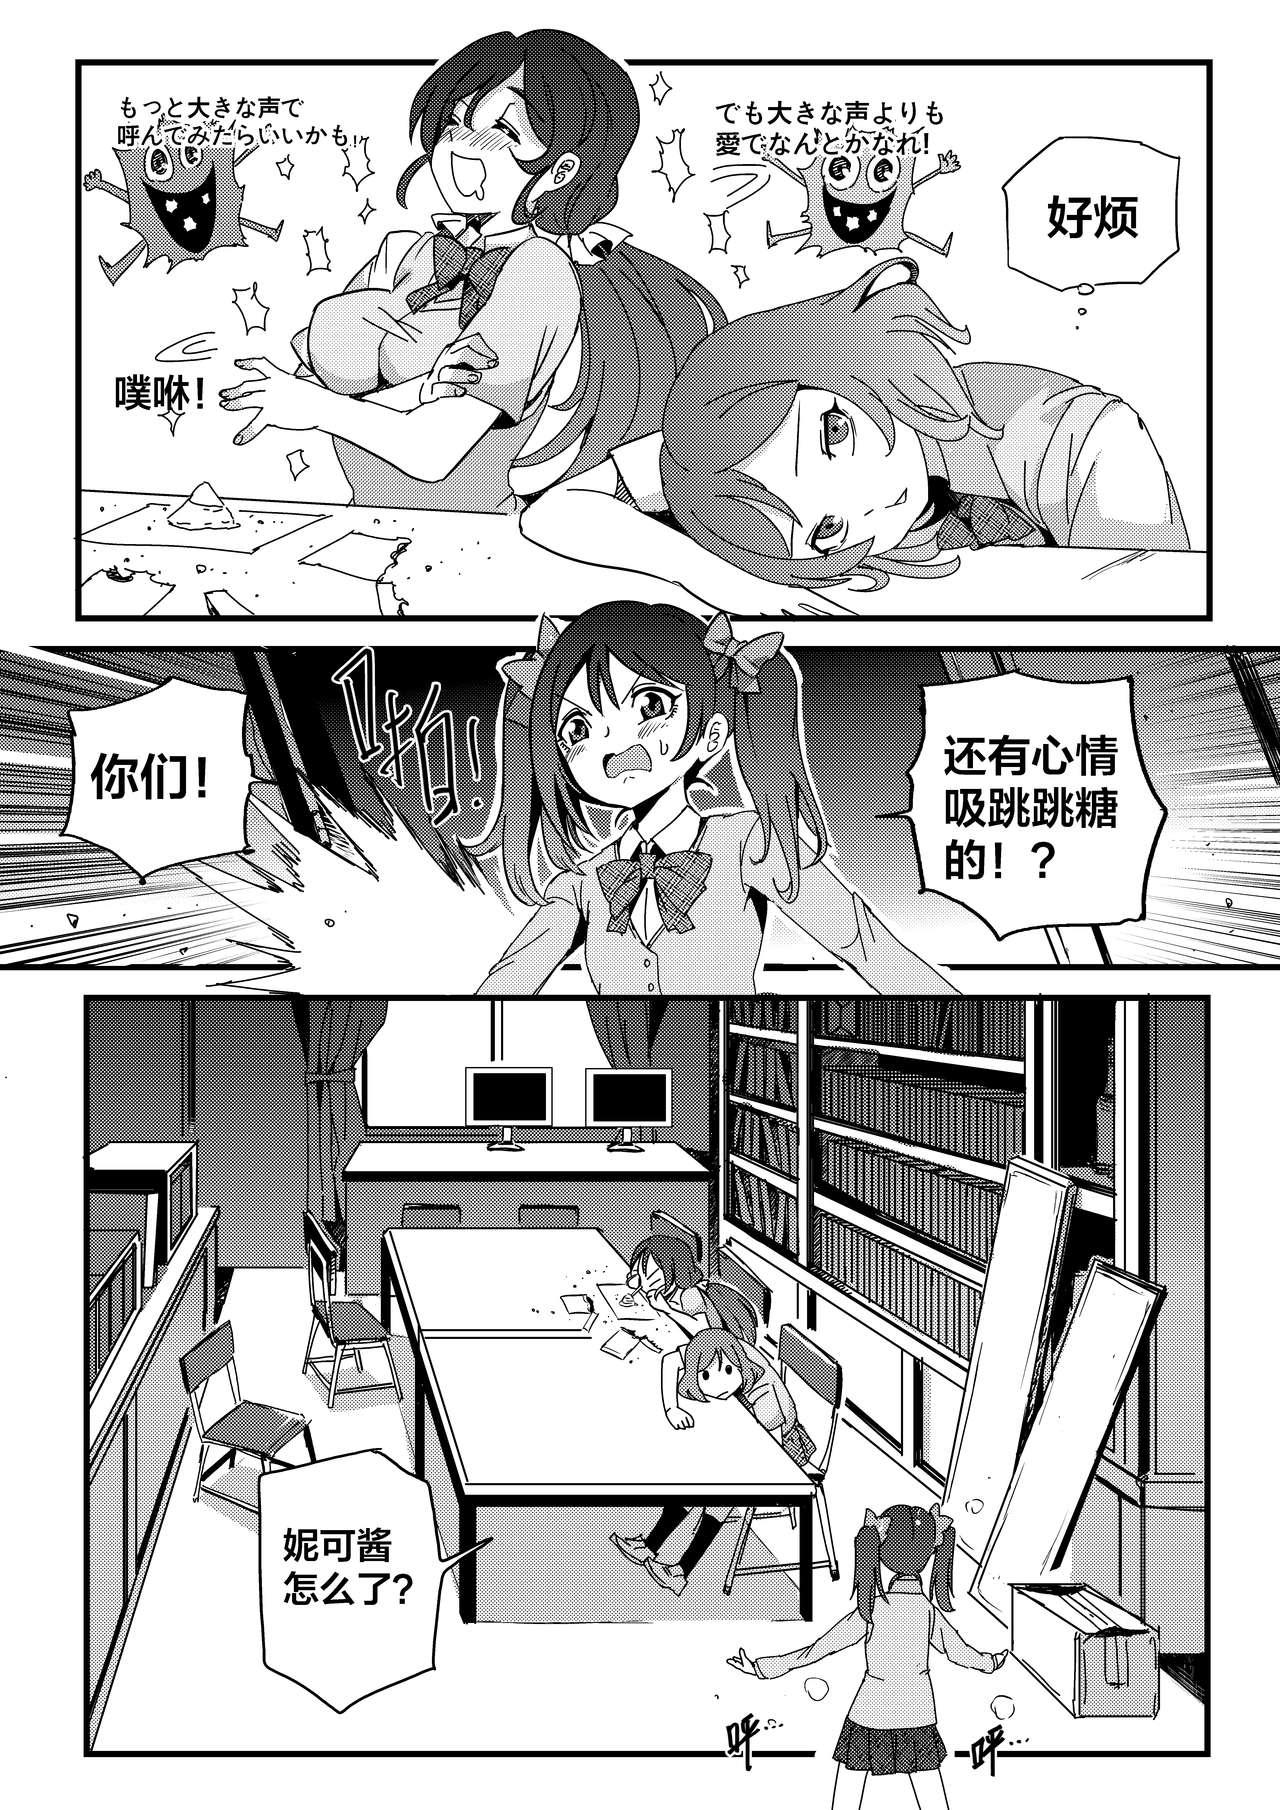 Naughty 果胆卯威 - Kantai collection The idolmaster Love live Topless - Page 2